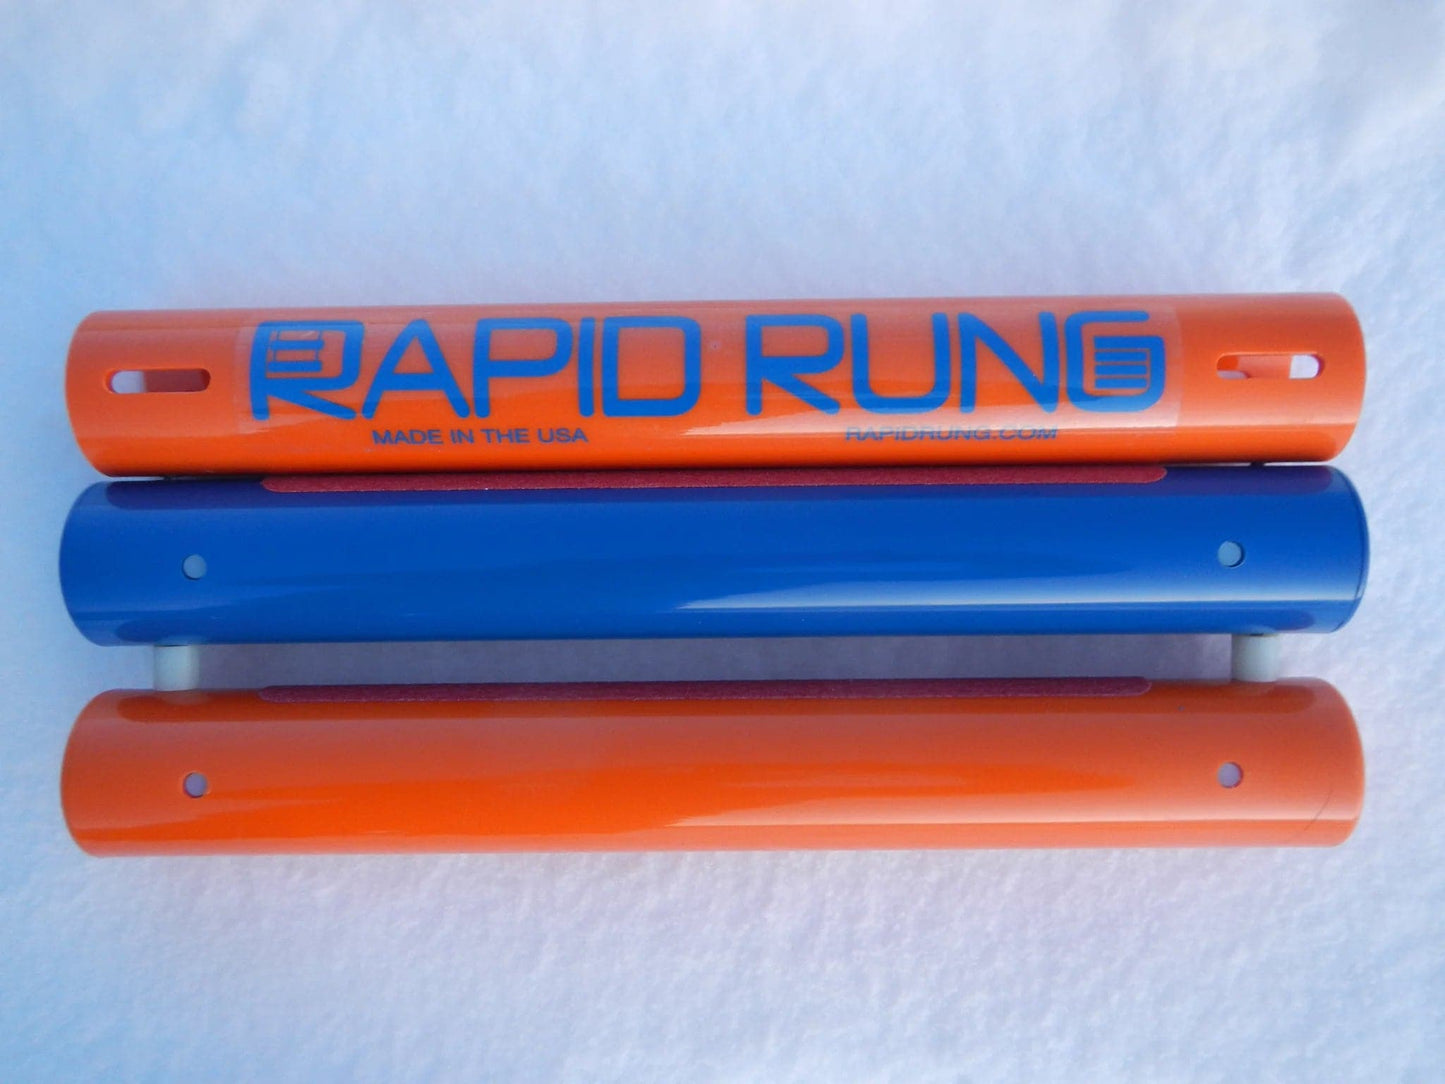 Two orange and blue tubes with the word Rapid Rung on them.